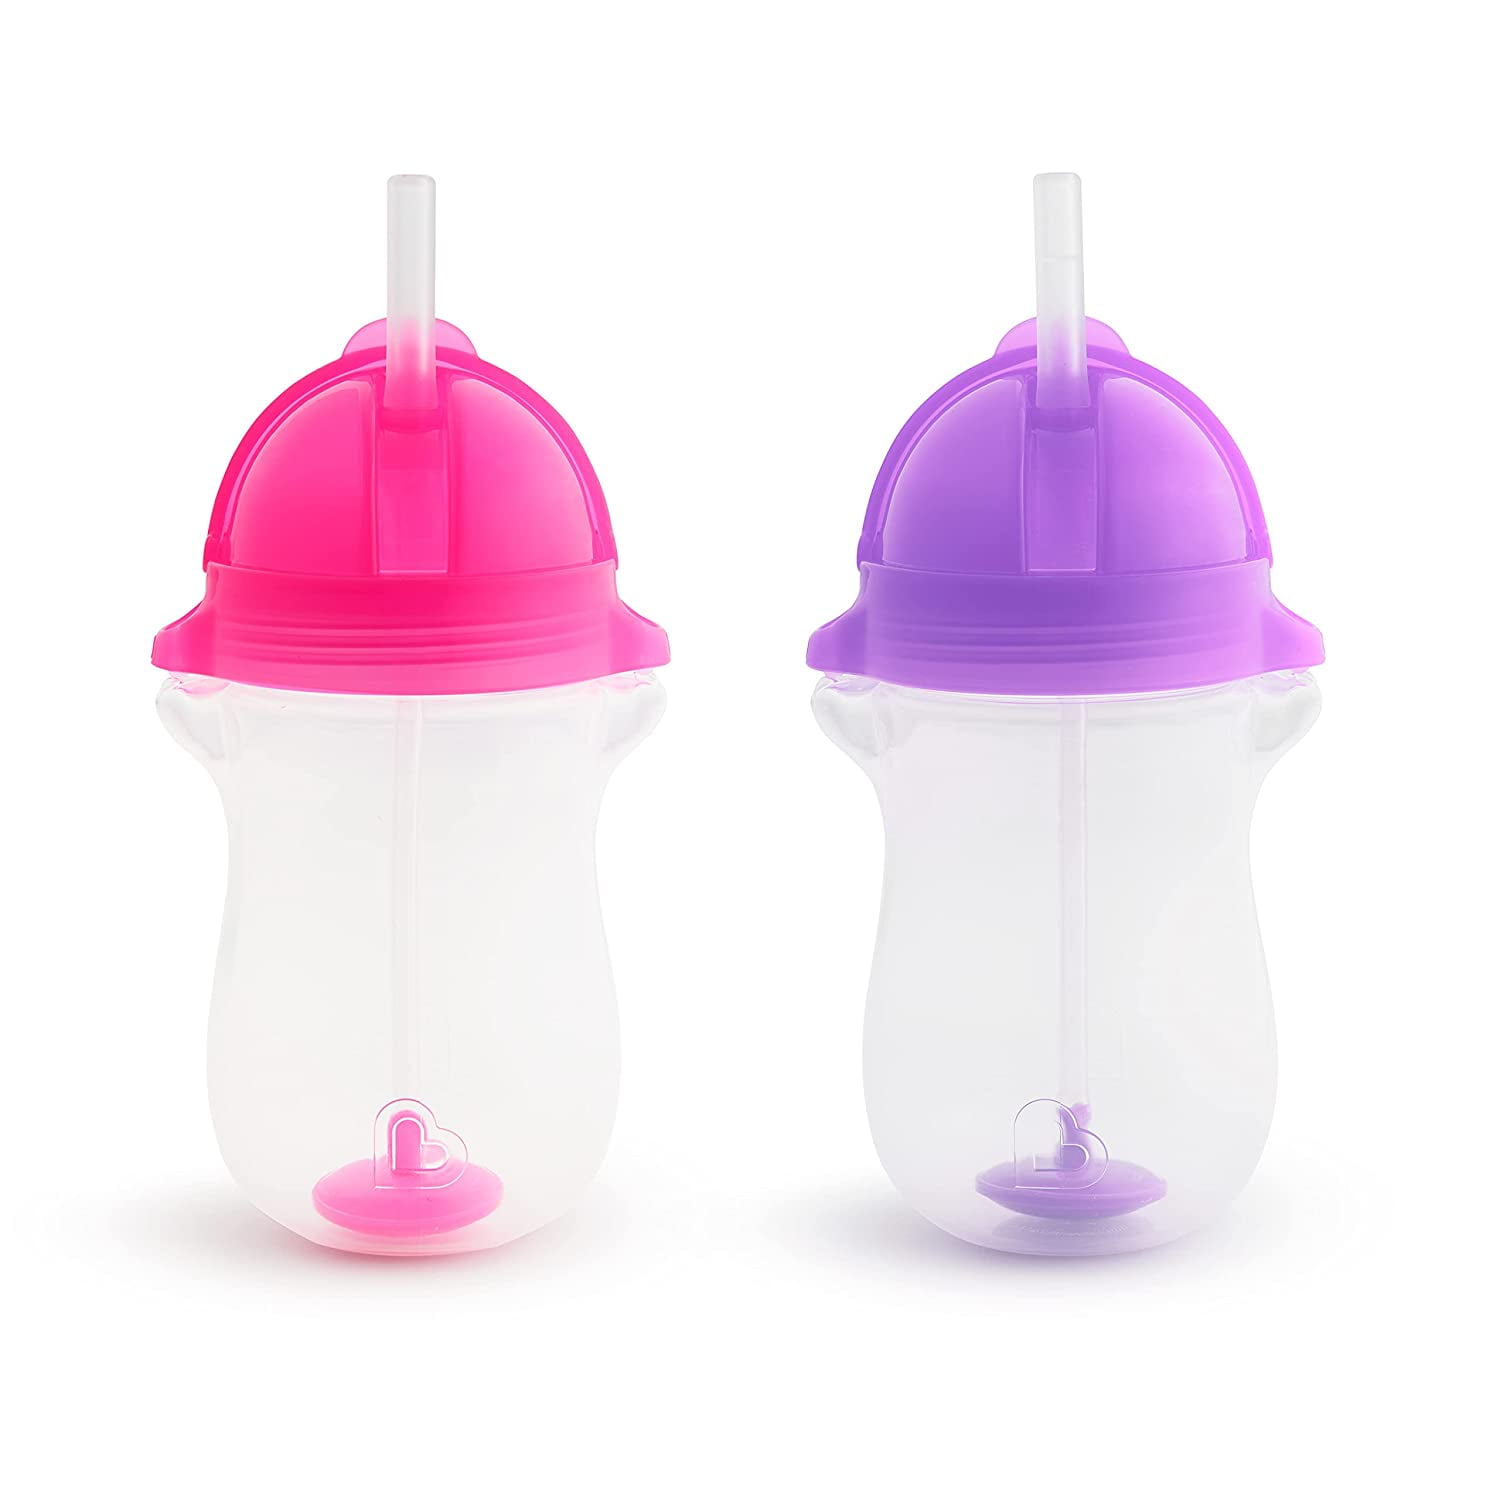 Lot Of 2 Munchkin Any Angle Weighted Straw Trainer Cup with Click